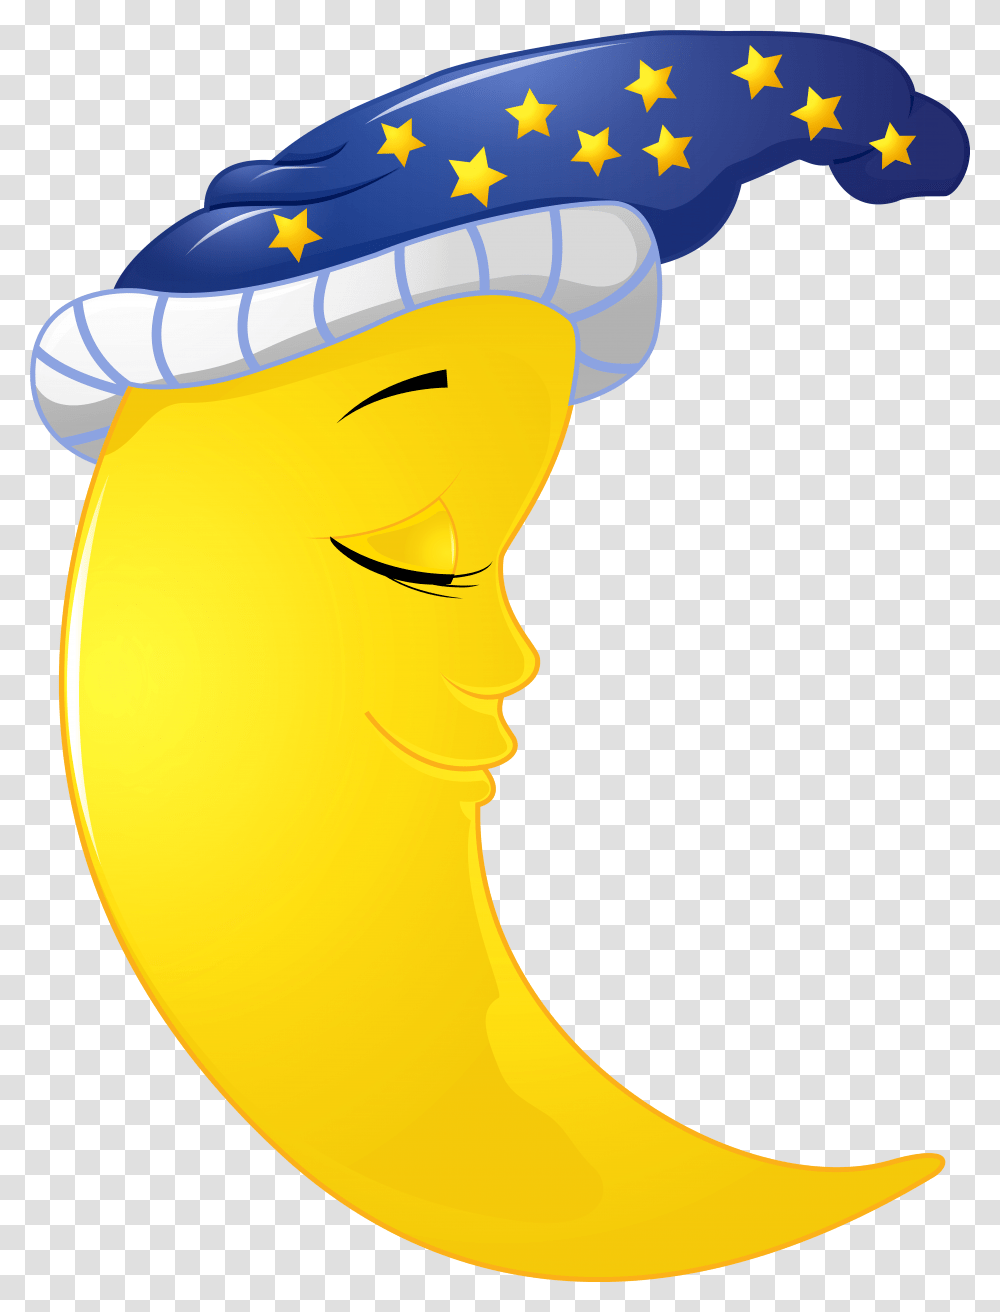 Moon Emoji Cute Clip Art Image Gallery Cute Moon Clipart, Banana, Graphics, Whistle Transparent Png